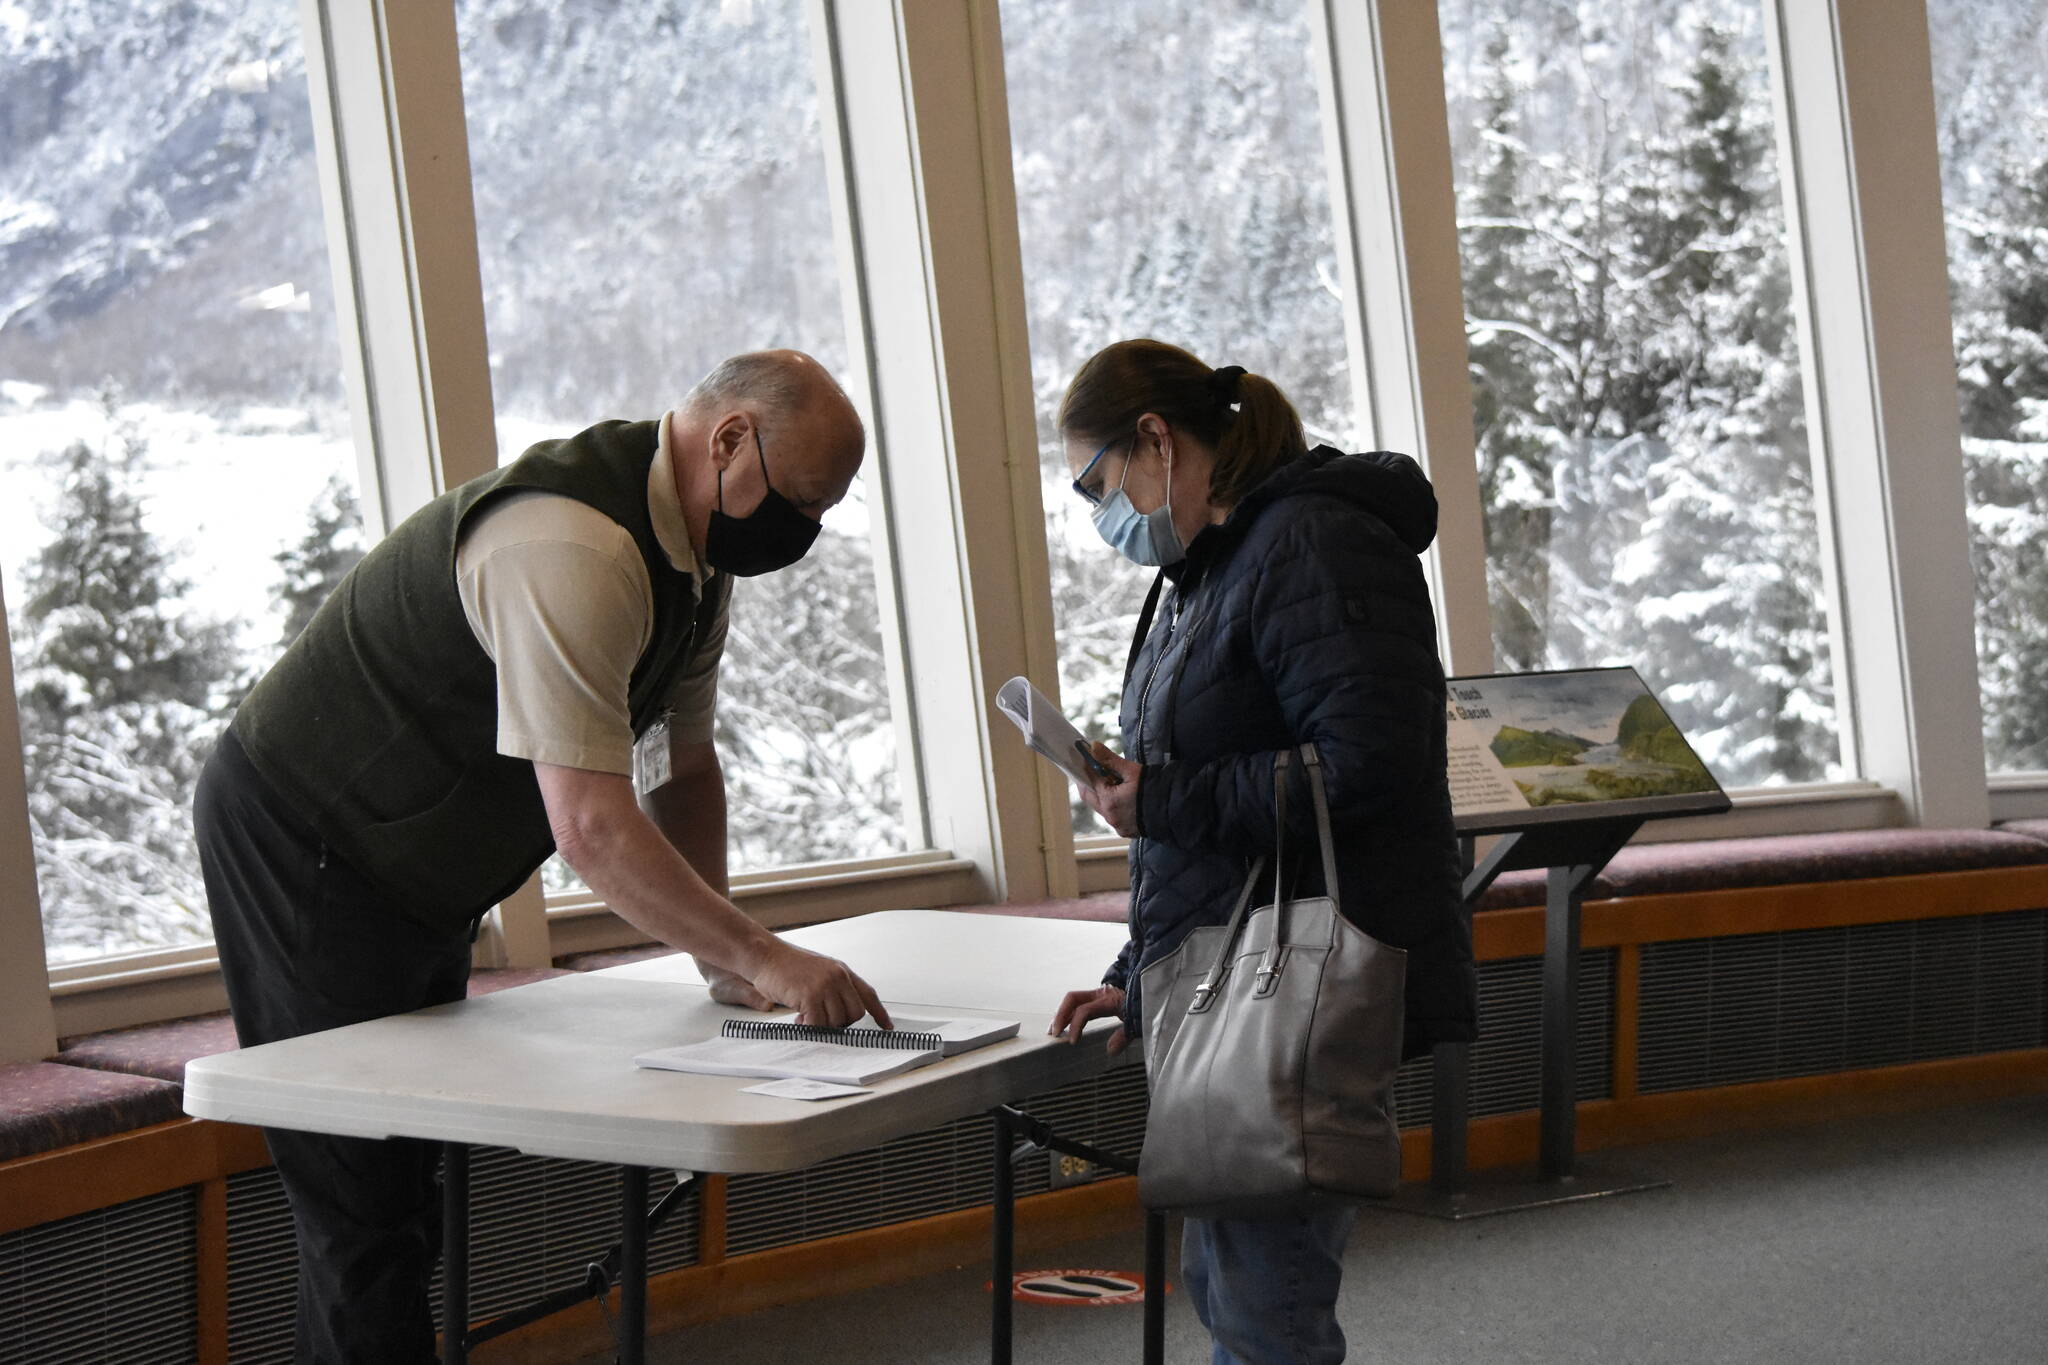 U.S. Forest Service engineer Harvey Hegett, left, explains details of the planned expansion of the Mendenhall Glacier Visitor Center at an open house at the center on Tuesday, March 15, 2022. (Peter Segall / Juneau Empire)